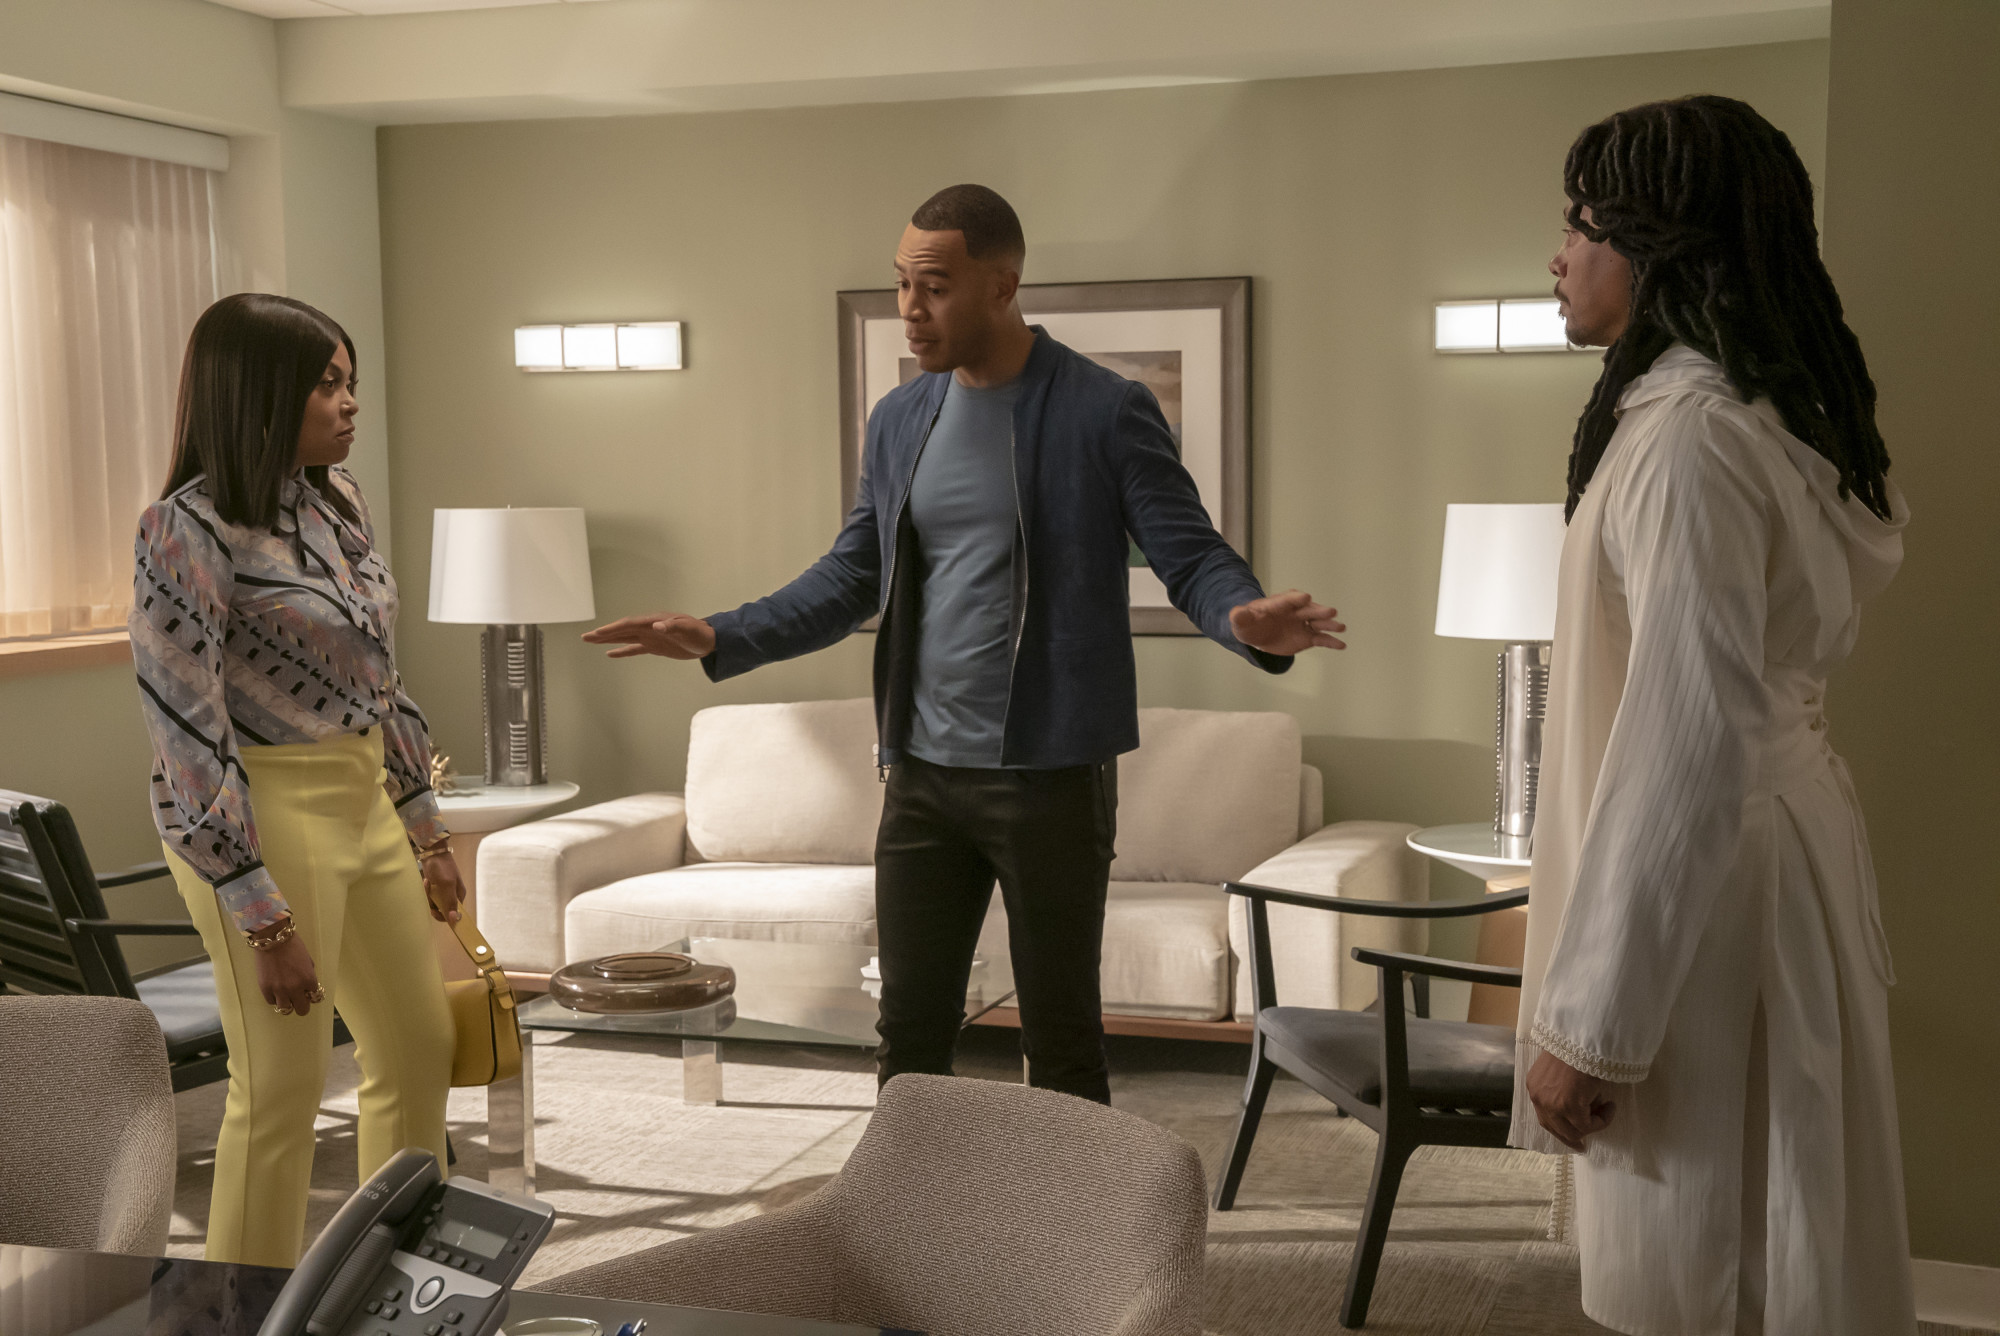 EMPIRE: L-R: Taraji P. Henson, Trai Byers and Terrence Howard in the "What Is Love" season premiere episode of EMPIRE airing Tuesday, Sept. 24 (9:00-10:00 PM ET/PT) on FOX. ©2019 Fox Broadcasting Co. All Rights Reserved. CR: Chuck Hodes/FOX.